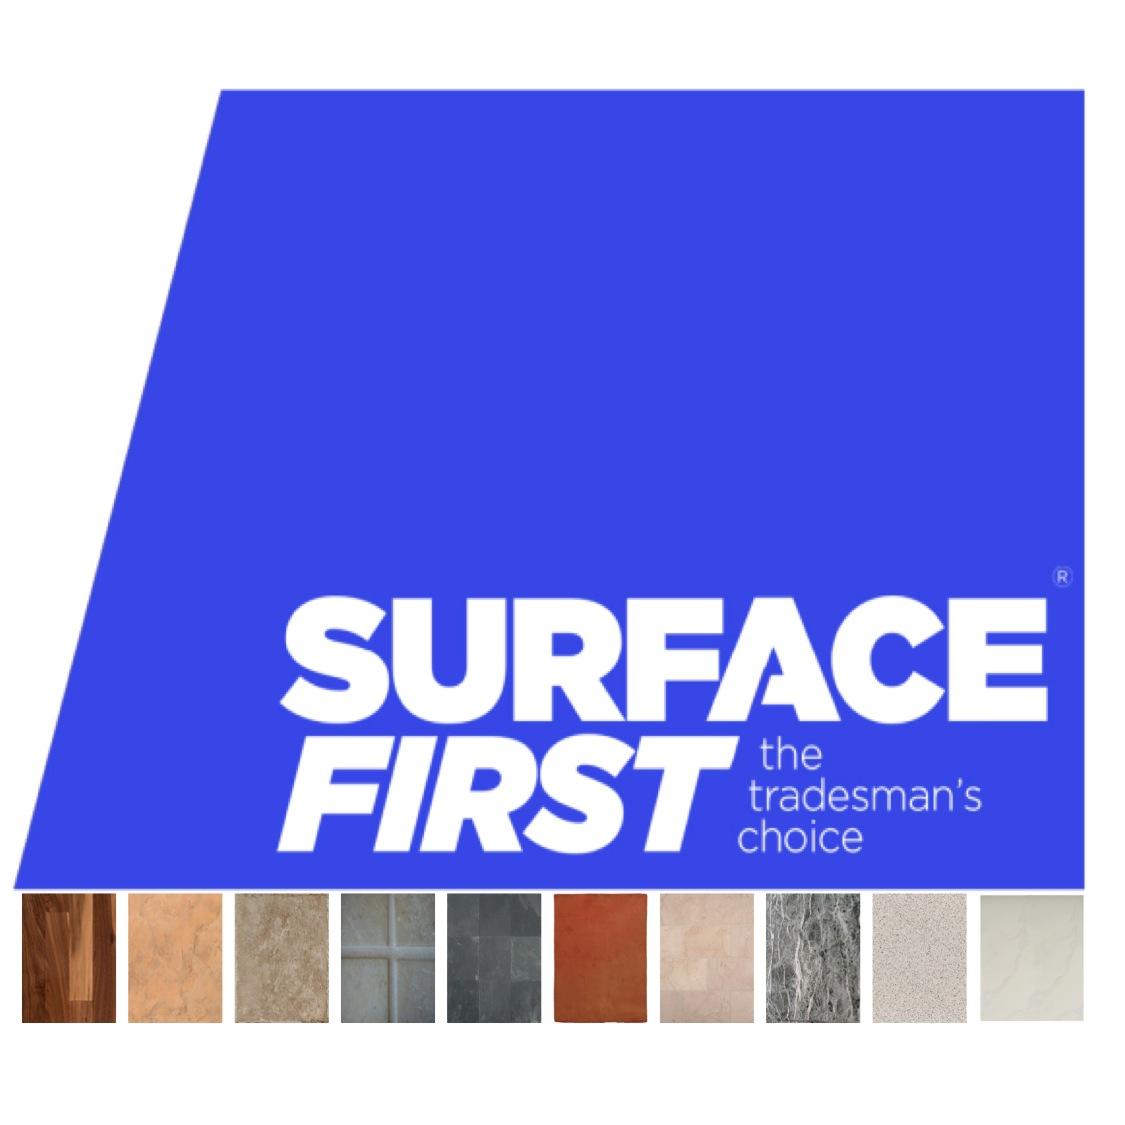 Surface First is a new range of industrial  surface maintenance products for both the public and commercial market. Produced by Northern Ceramics LTD